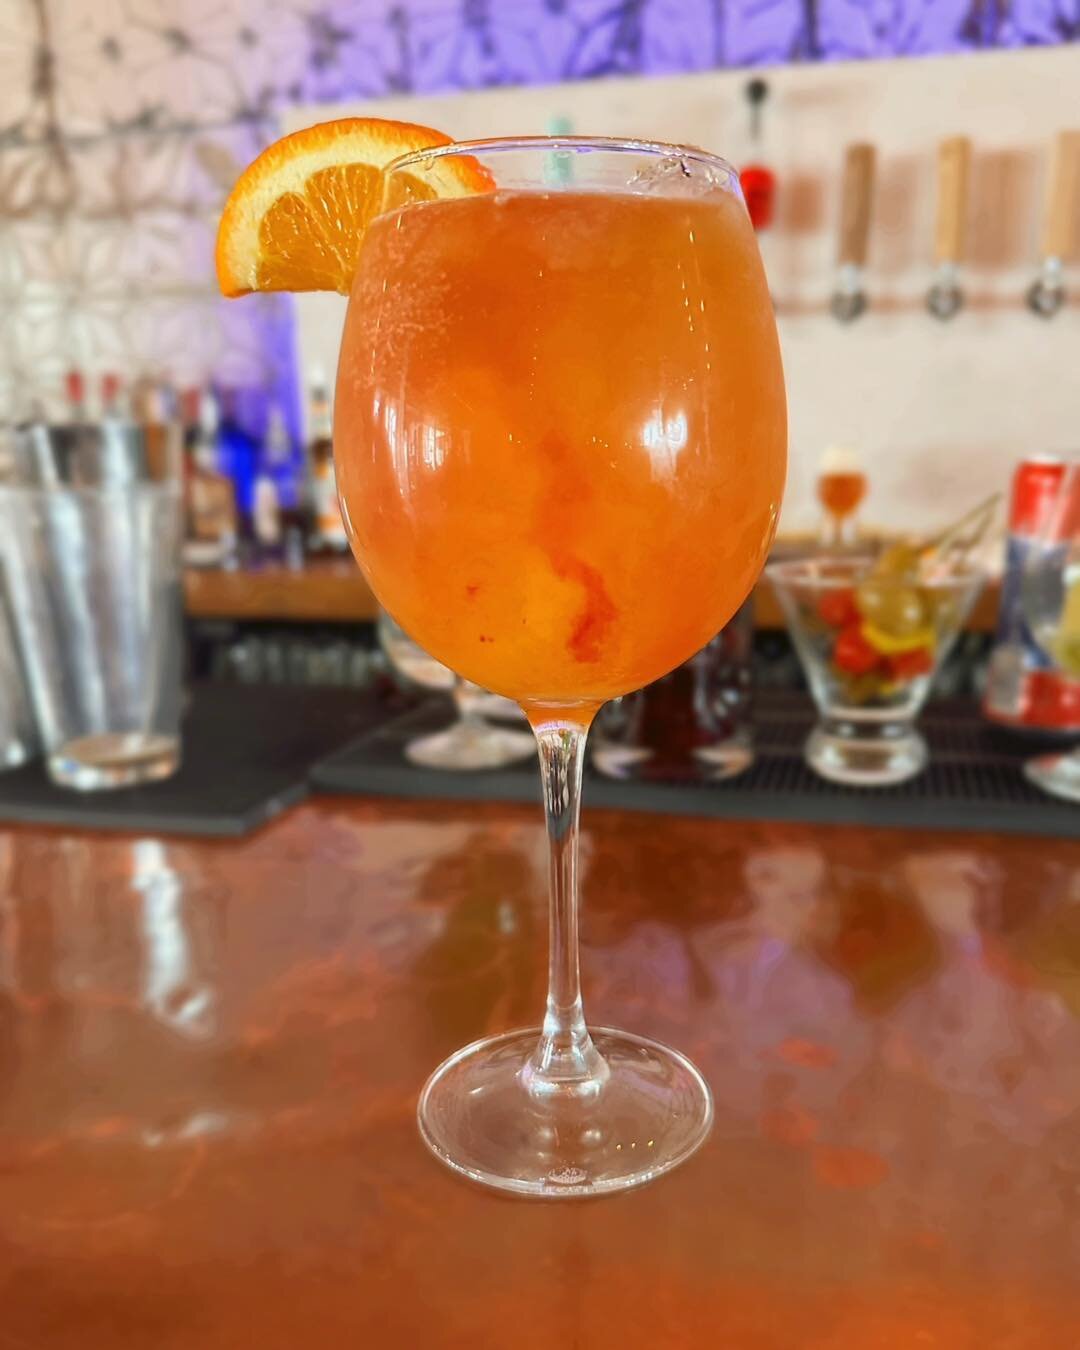 🍑 Brunch Punch! 🍑

Sebago Spider Island rum, Prosecco, peach schnapps, blood orange seltzer &amp; pineapple juice.

Serving brunch from 11-3. See you soon!